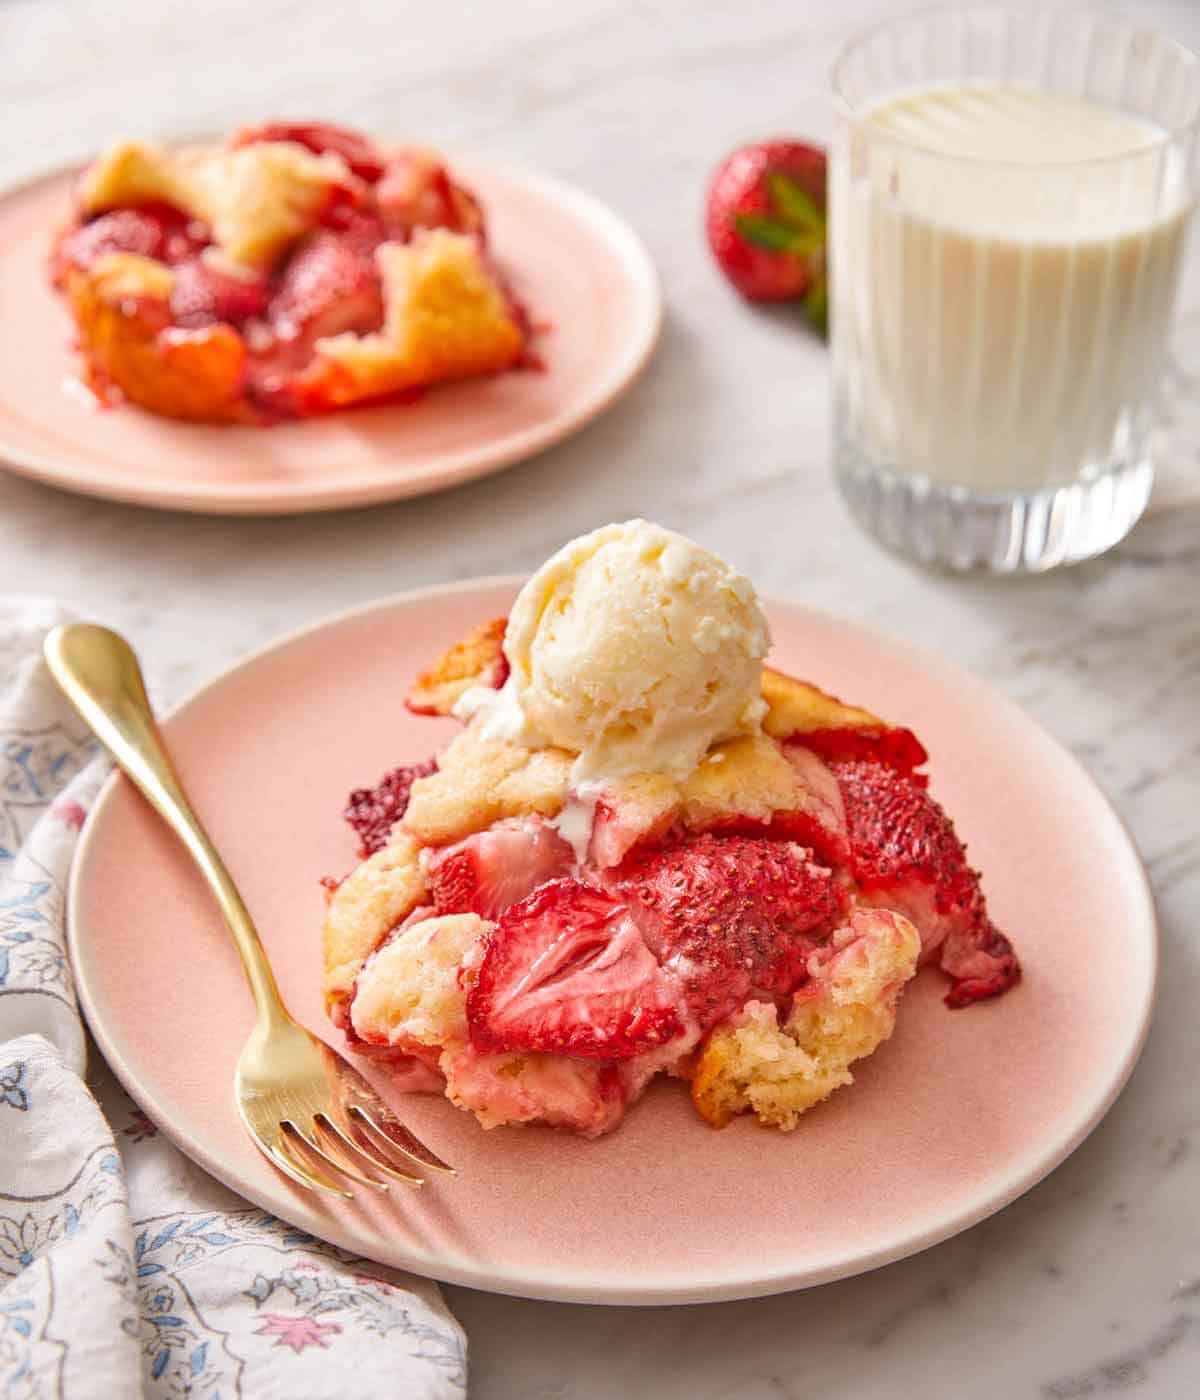 A plate with a serving of strawberry cobbler with a scoop of vanilla ice cream on top.